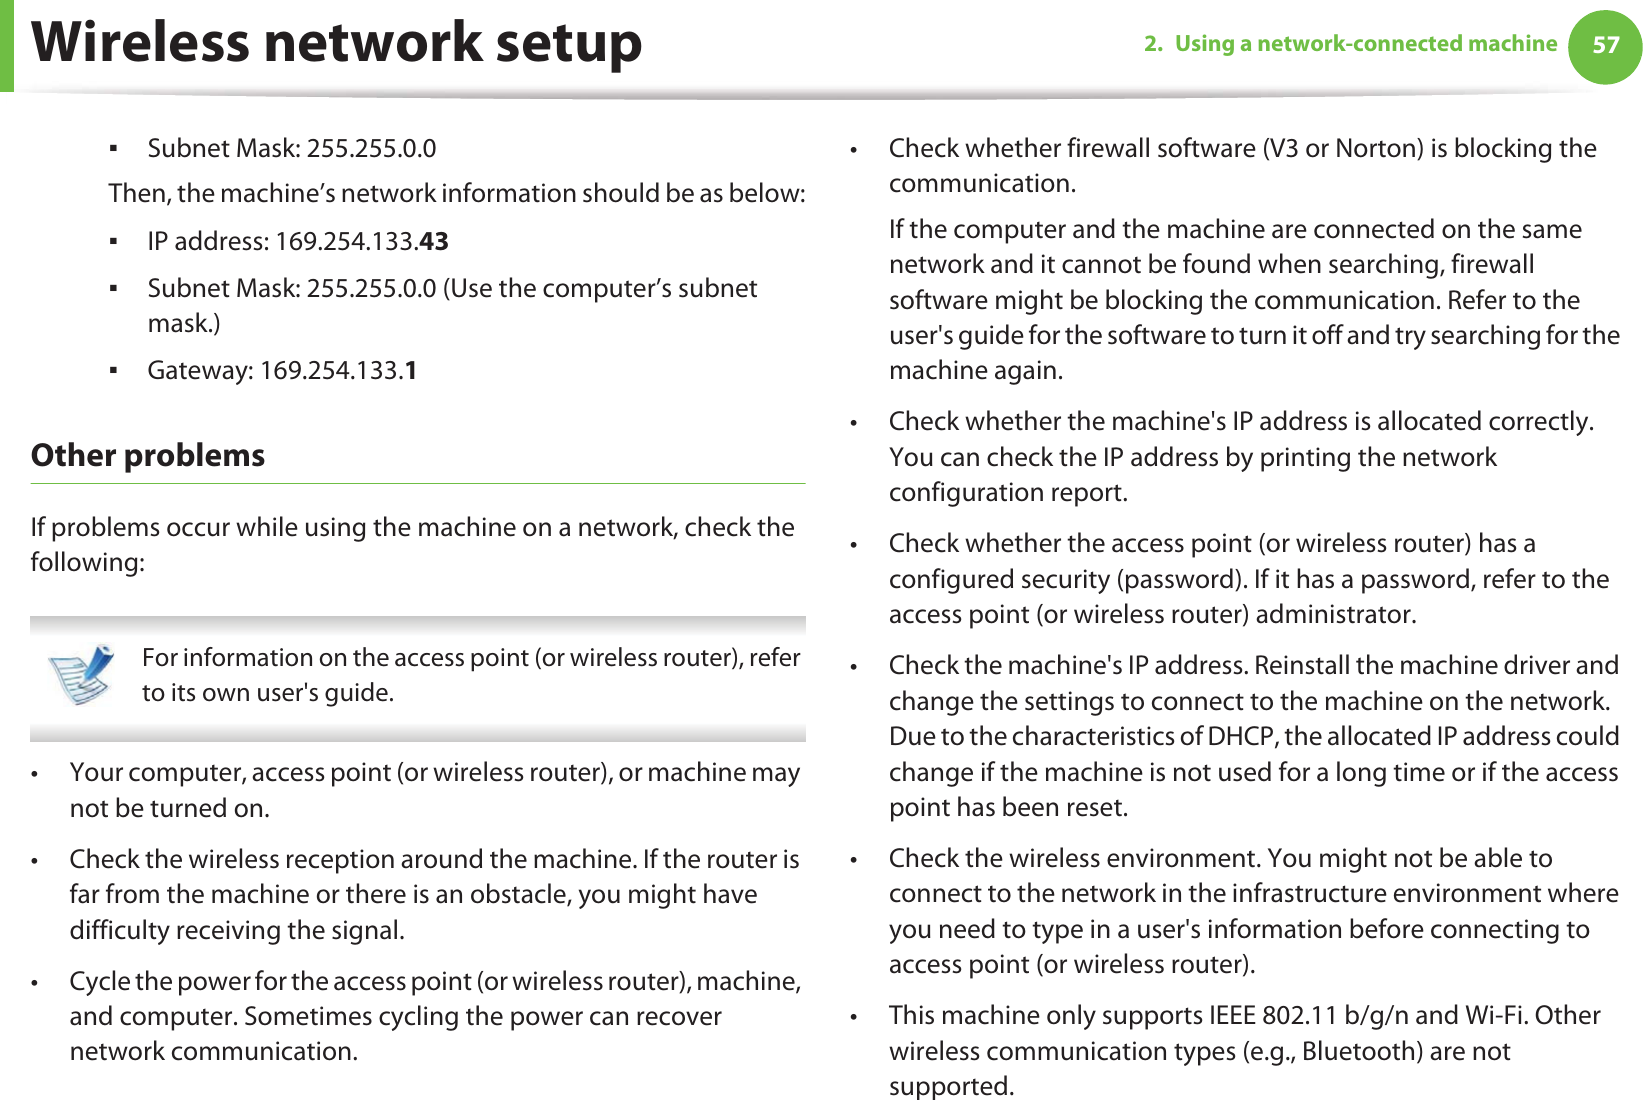 Wireless network setup 572. Using a network-connected machineƒSubnet Mask: 255.255.0.0Then, the machine’s network information should be as below:ƒIP address: 169.254.133.43ƒSubnet Mask: 255.255.0.0 (Use the computer’s subnet mask.)ƒGateway: 169.254.133.1Other problemsIf problems occur while using the machine on a network, check the following:  For information on the access point (or wireless router), refer to its own user&apos;s guide.  • Your computer, access point (or wireless router), or machine may not be turned on.• Check the wireless reception around the machine. If the router is far from the machine or there is an obstacle, you might have difficulty receiving the signal. • Cycle the power for the access point (or wireless router), machine, and computer. Sometimes cycling the power can recover network communication.• Check whether firewall software (V3 or Norton) is blocking the communication. If the computer and the machine are connected on the same network and it cannot be found when searching, firewall software might be blocking the communication. Refer to the user&apos;s guide for the software to turn it off and try searching for the machine again.• Check whether the machine&apos;s IP address is allocated correctly. You can check the IP address by printing the network configuration report.• Check whether the access point (or wireless router) has a configured security (password). If it has a password, refer to the access point (or wireless router) administrator.• Check the machine&apos;s IP address. Reinstall the machine driver and change the settings to connect to the machine on the network. Due to the characteristics of DHCP, the allocated IP address could change if the machine is not used for a long time or if the access point has been reset.• Check the wireless environment. You might not be able to connect to the network in the infrastructure environment where you need to type in a user&apos;s information before connecting to access point (or wireless router).• This machine only supports IEEE 802.11 b/g/n and Wi-Fi. Other wireless communication types (e.g., Bluetooth) are not supported.